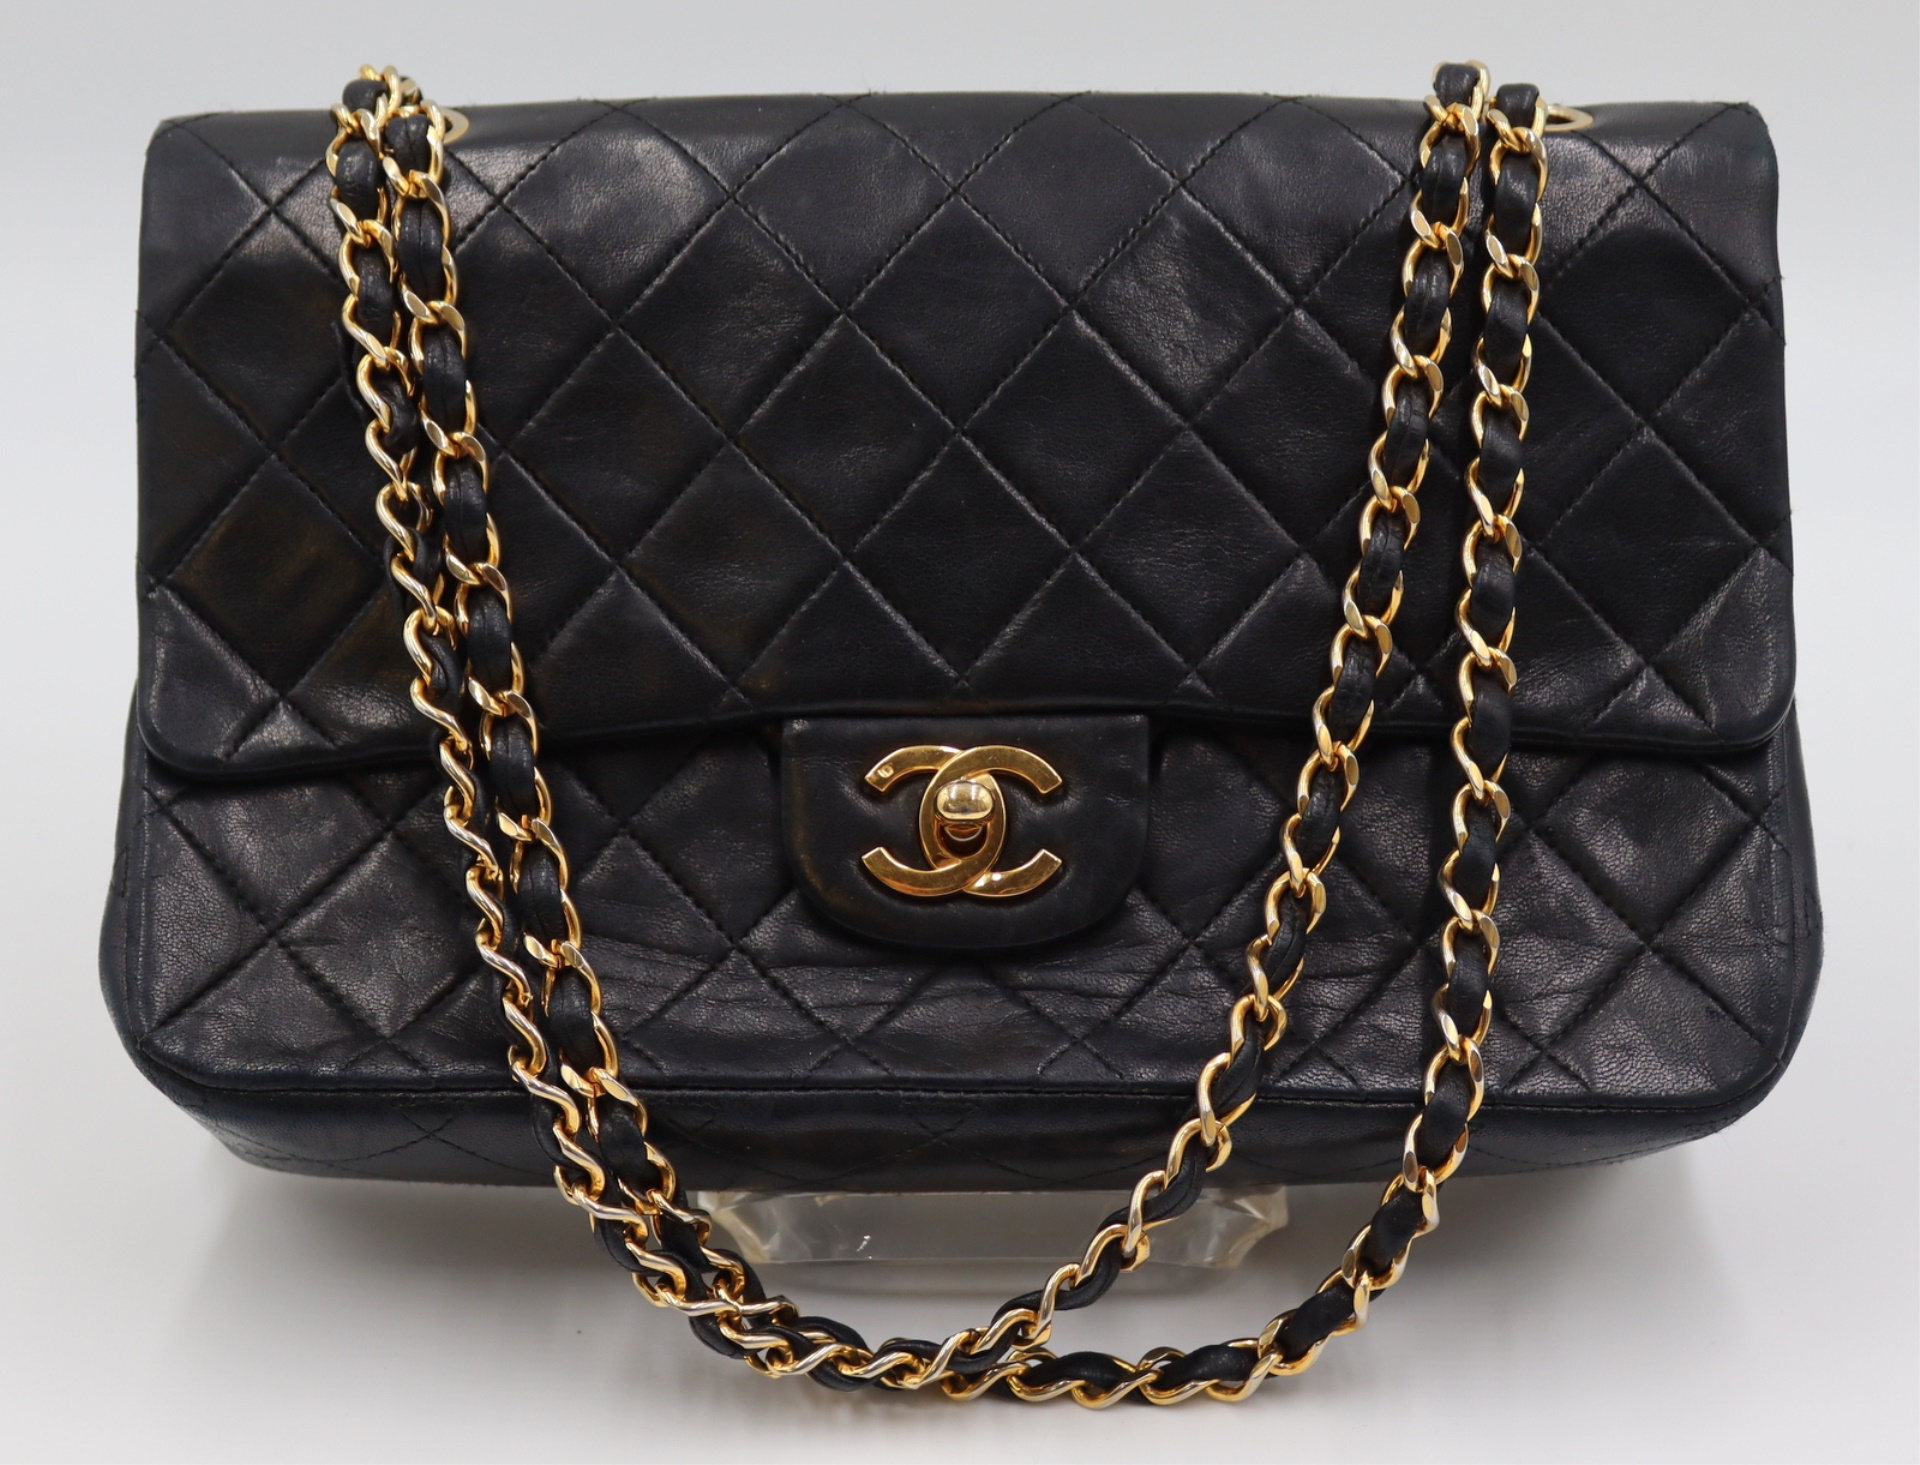 COUTURE VINTAGE CHANEL MEDIUM 3be61f